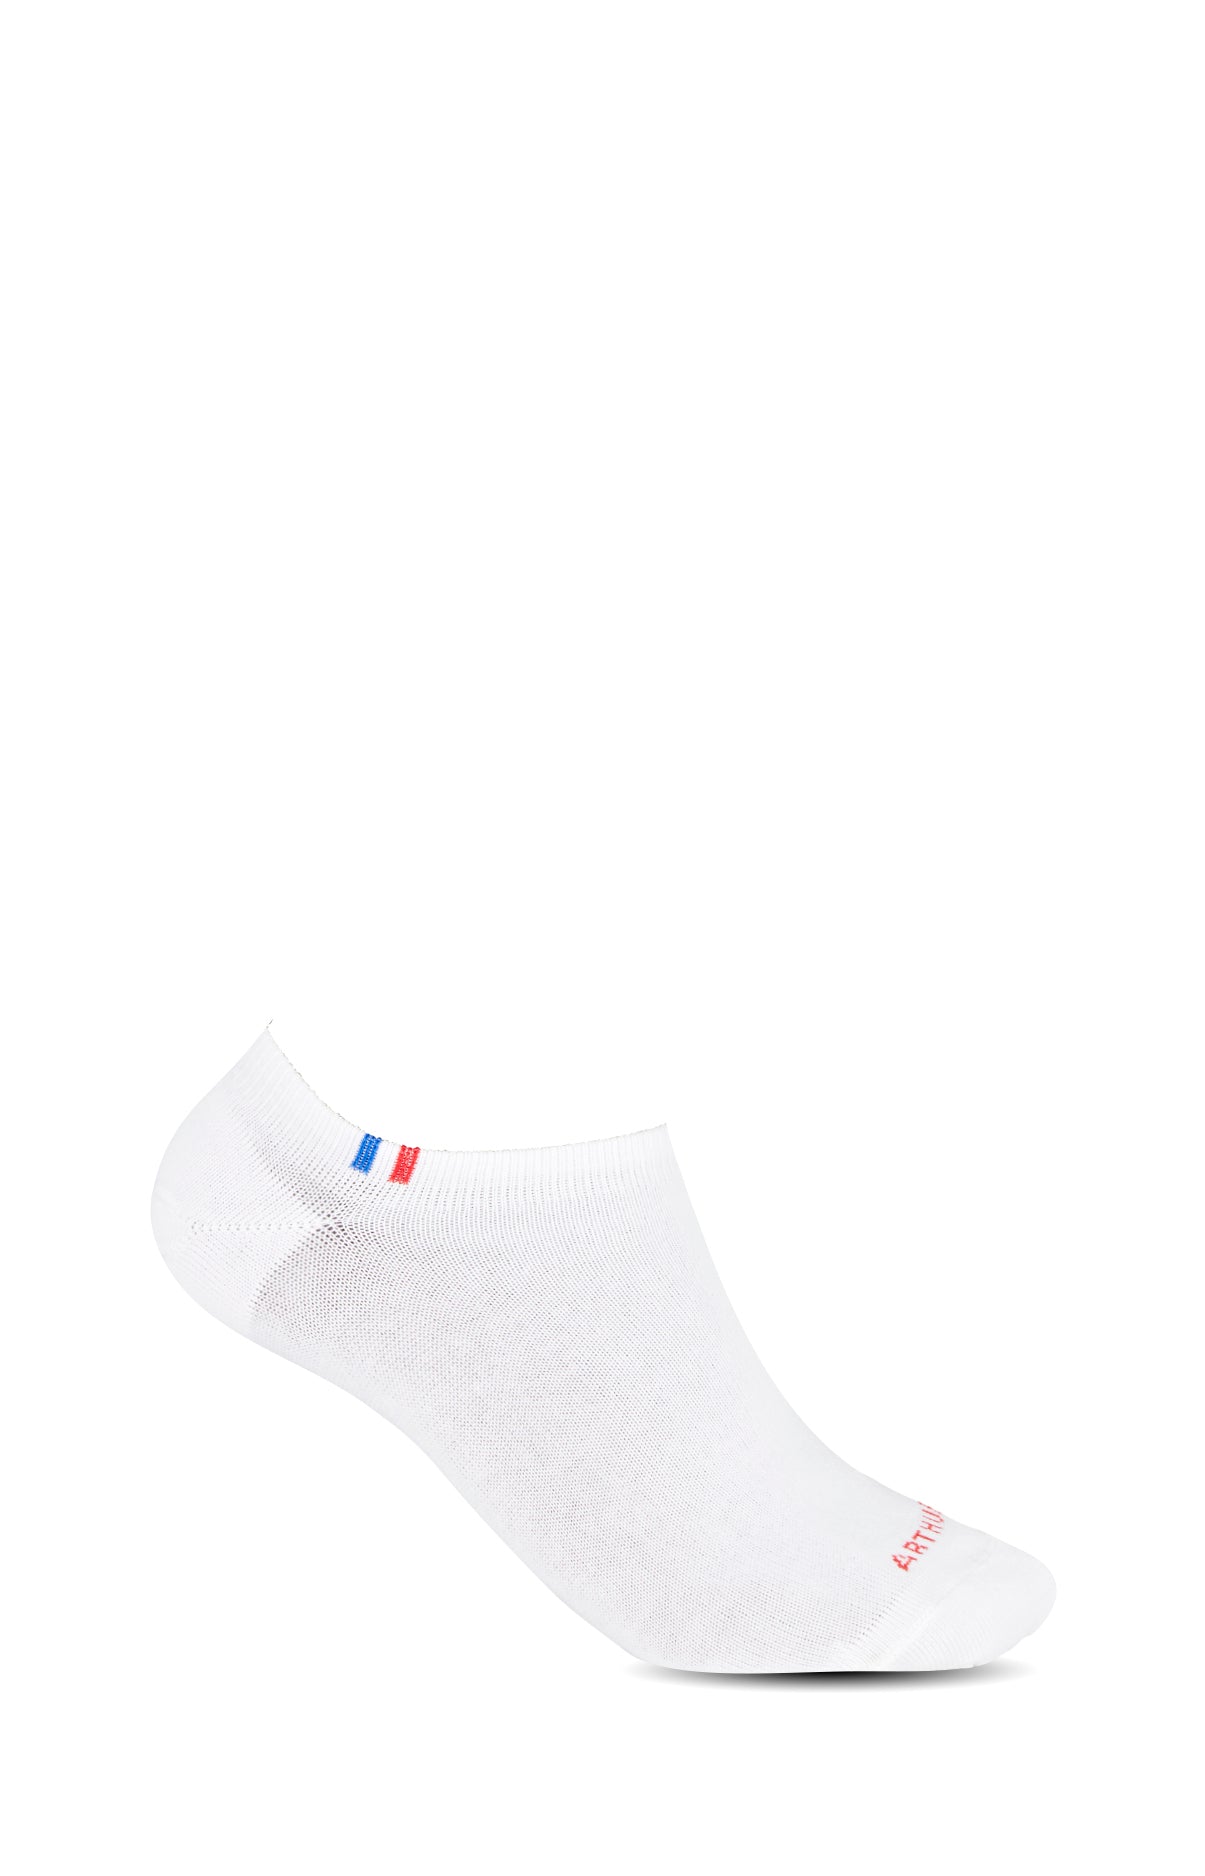 Pack 2 chaussettes invisibles blanc 36/40